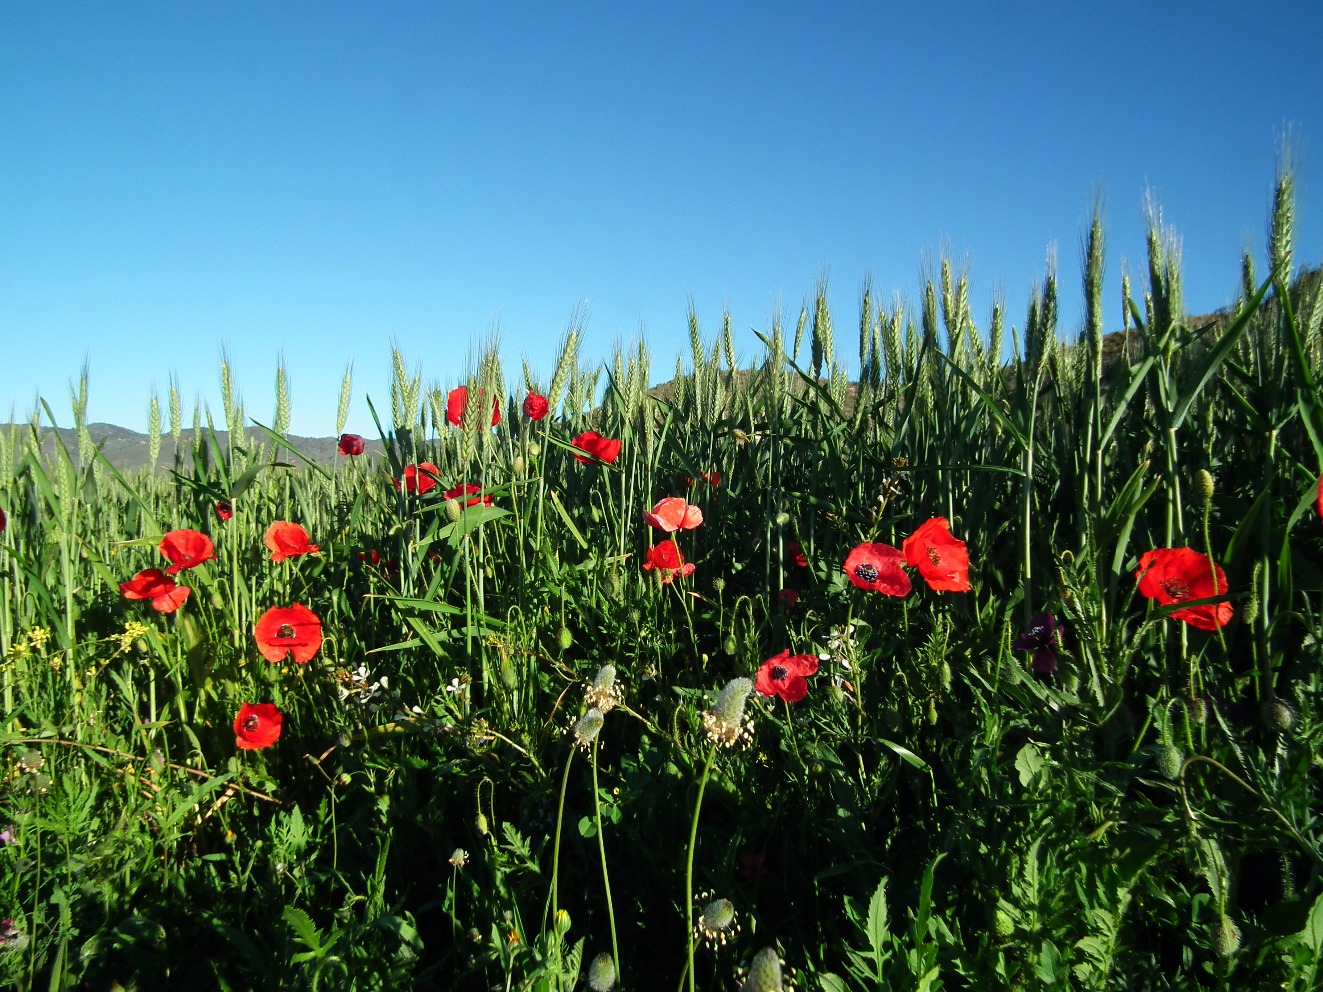 Poppies with Wheat